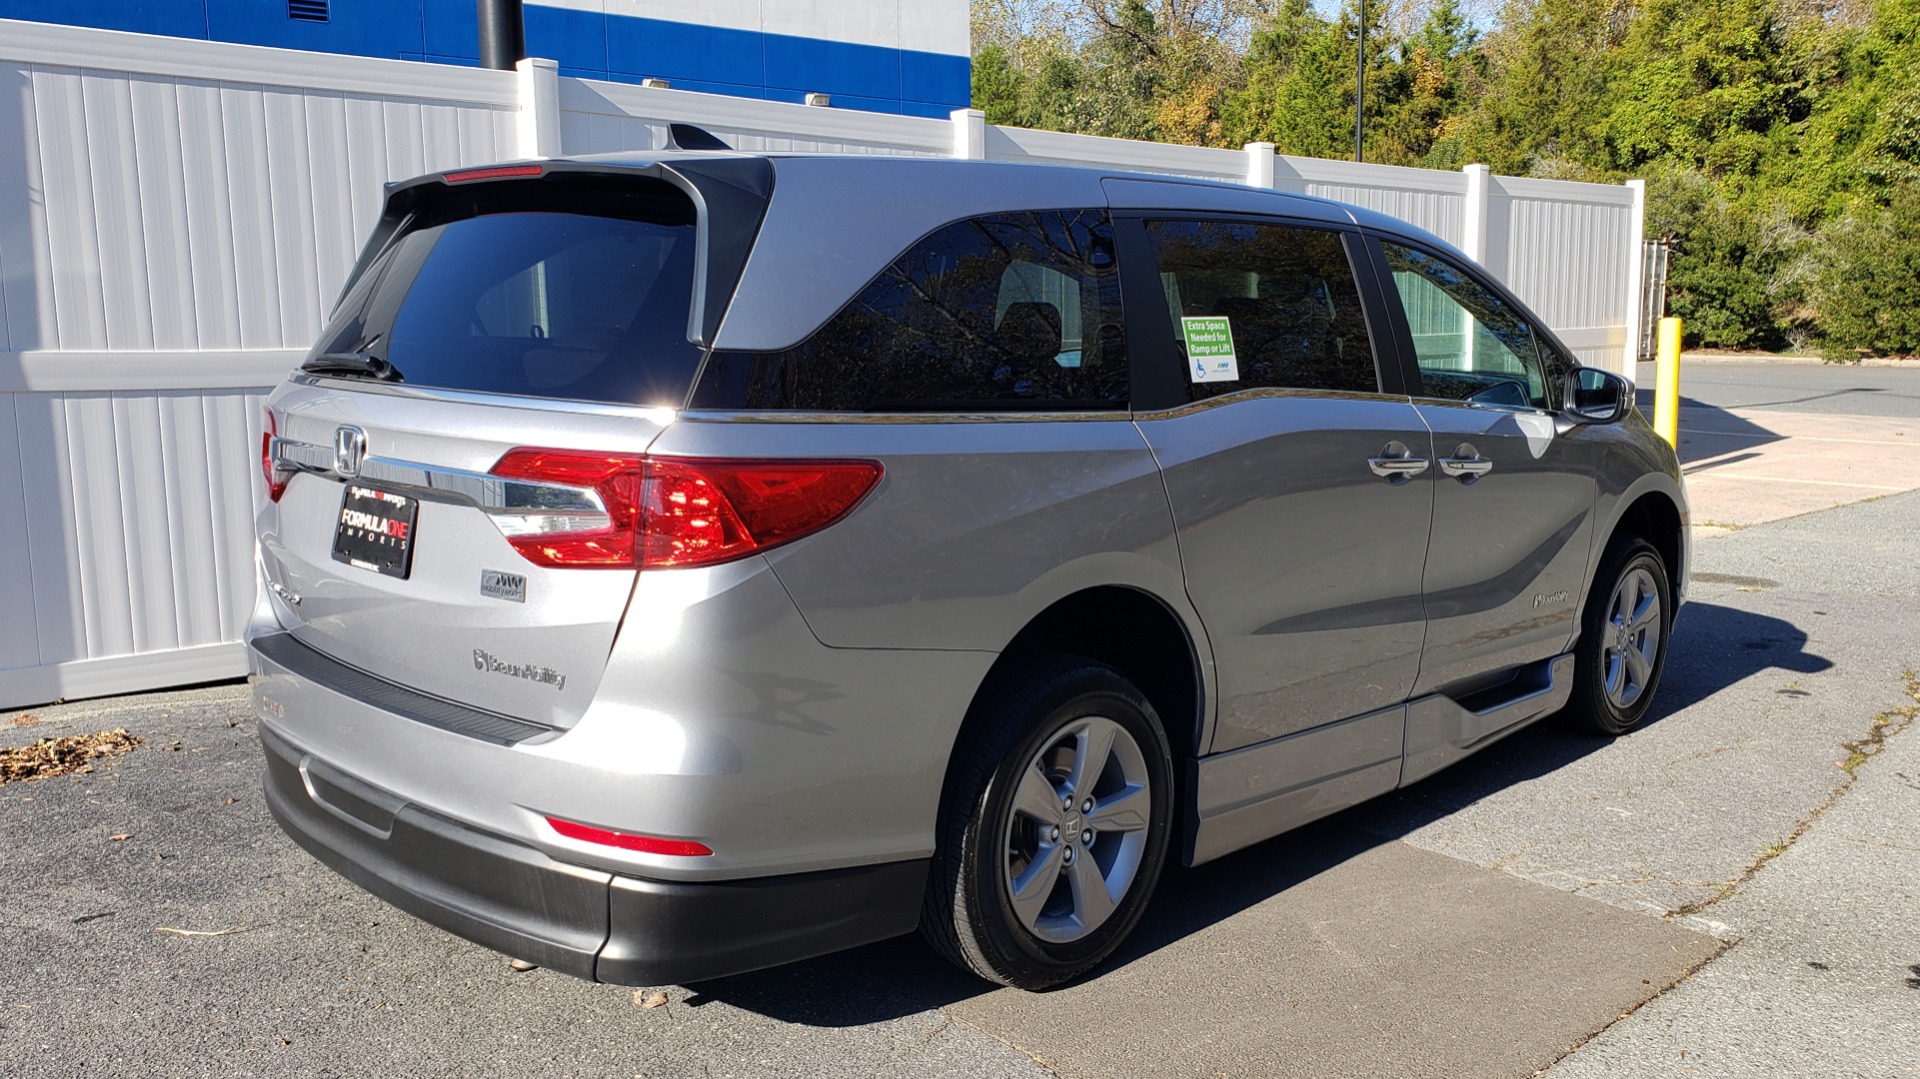 Used 2019 Honda ODYSSEY EX-L BRAUNABILITY / NAV / RES / LKA / BLUE-RAY / SUNROOF / REARVIEW for sale Sold at Formula Imports in Charlotte NC 28227 6